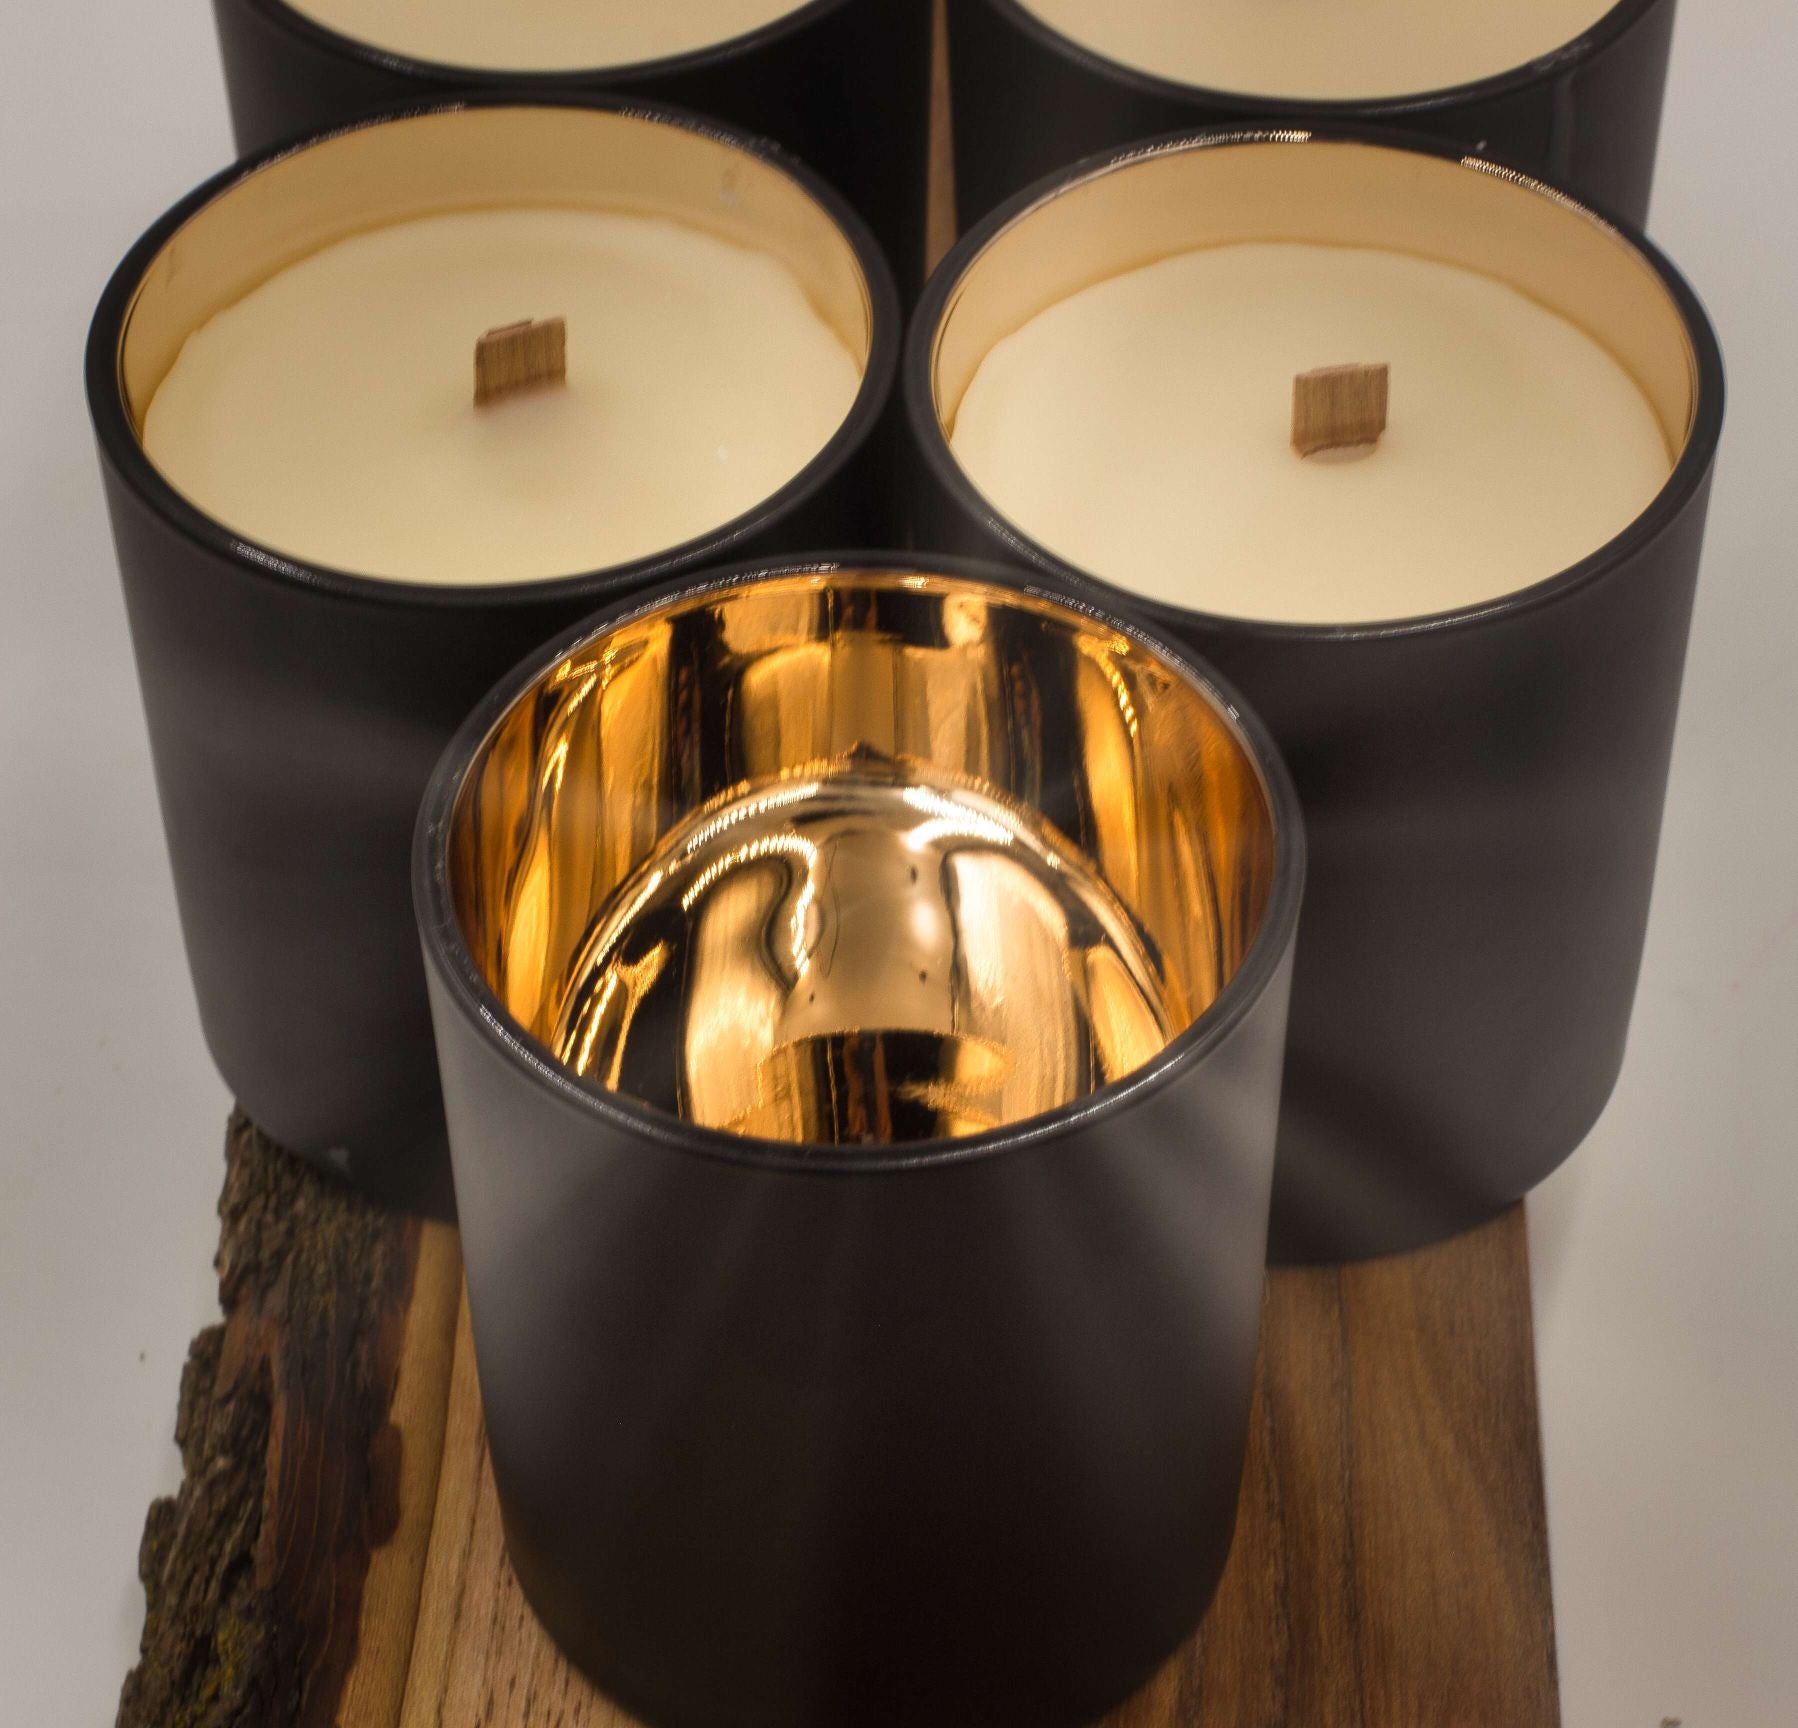 Our matte black tumbler has a gold plated reflective interior.